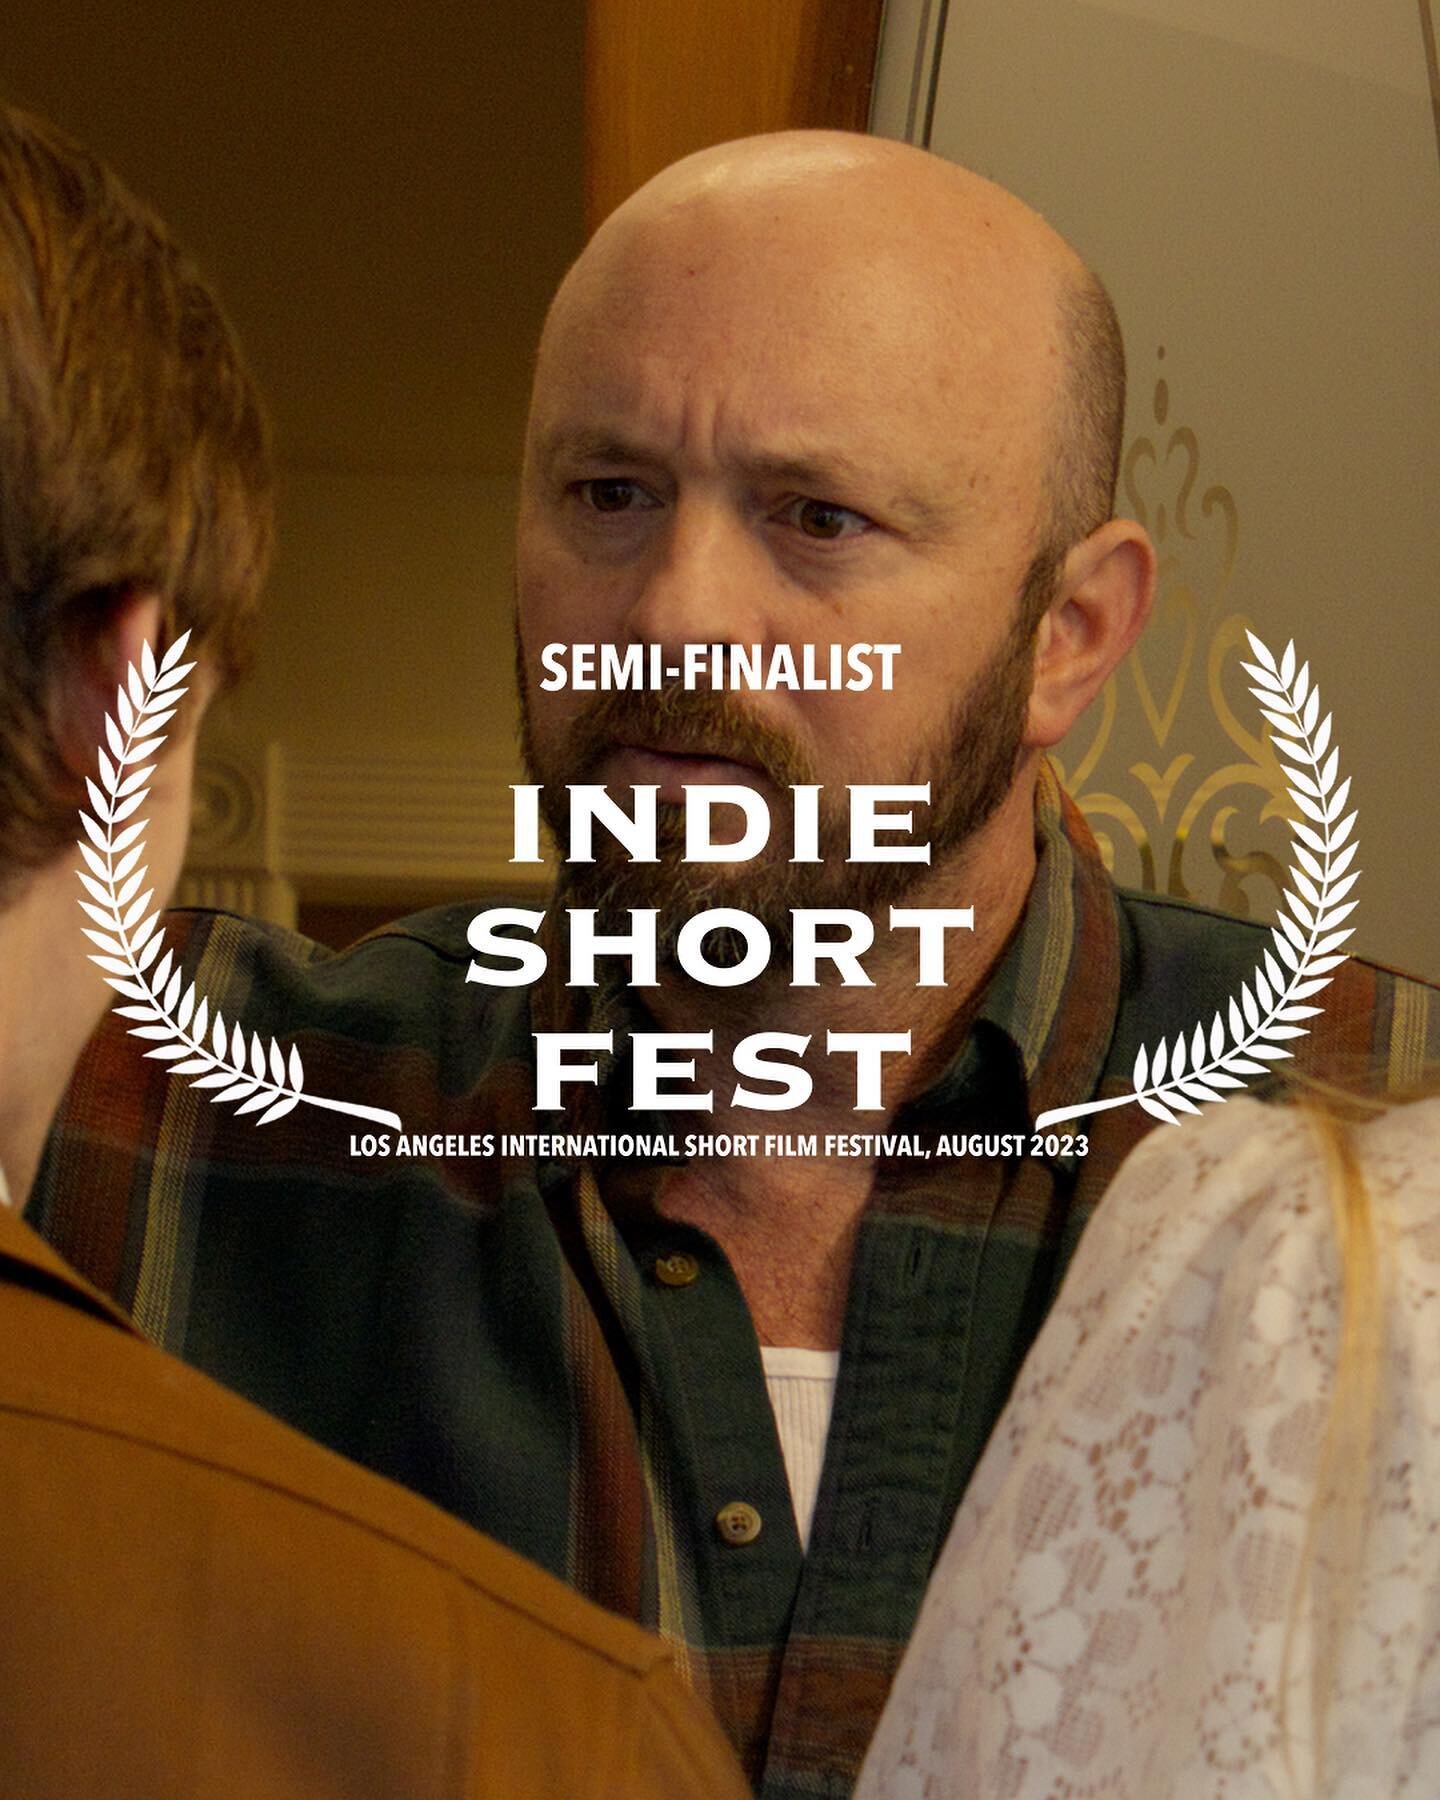 we&rsquo;re bi-coastal!

not only is Daisies an official selection of the @indieshortfest, Daisies is also honored as a semi-finalist for this month&rsquo;s competition. 

every month, Indie Short Fest establishes a comprehensive hierarchy of the mos